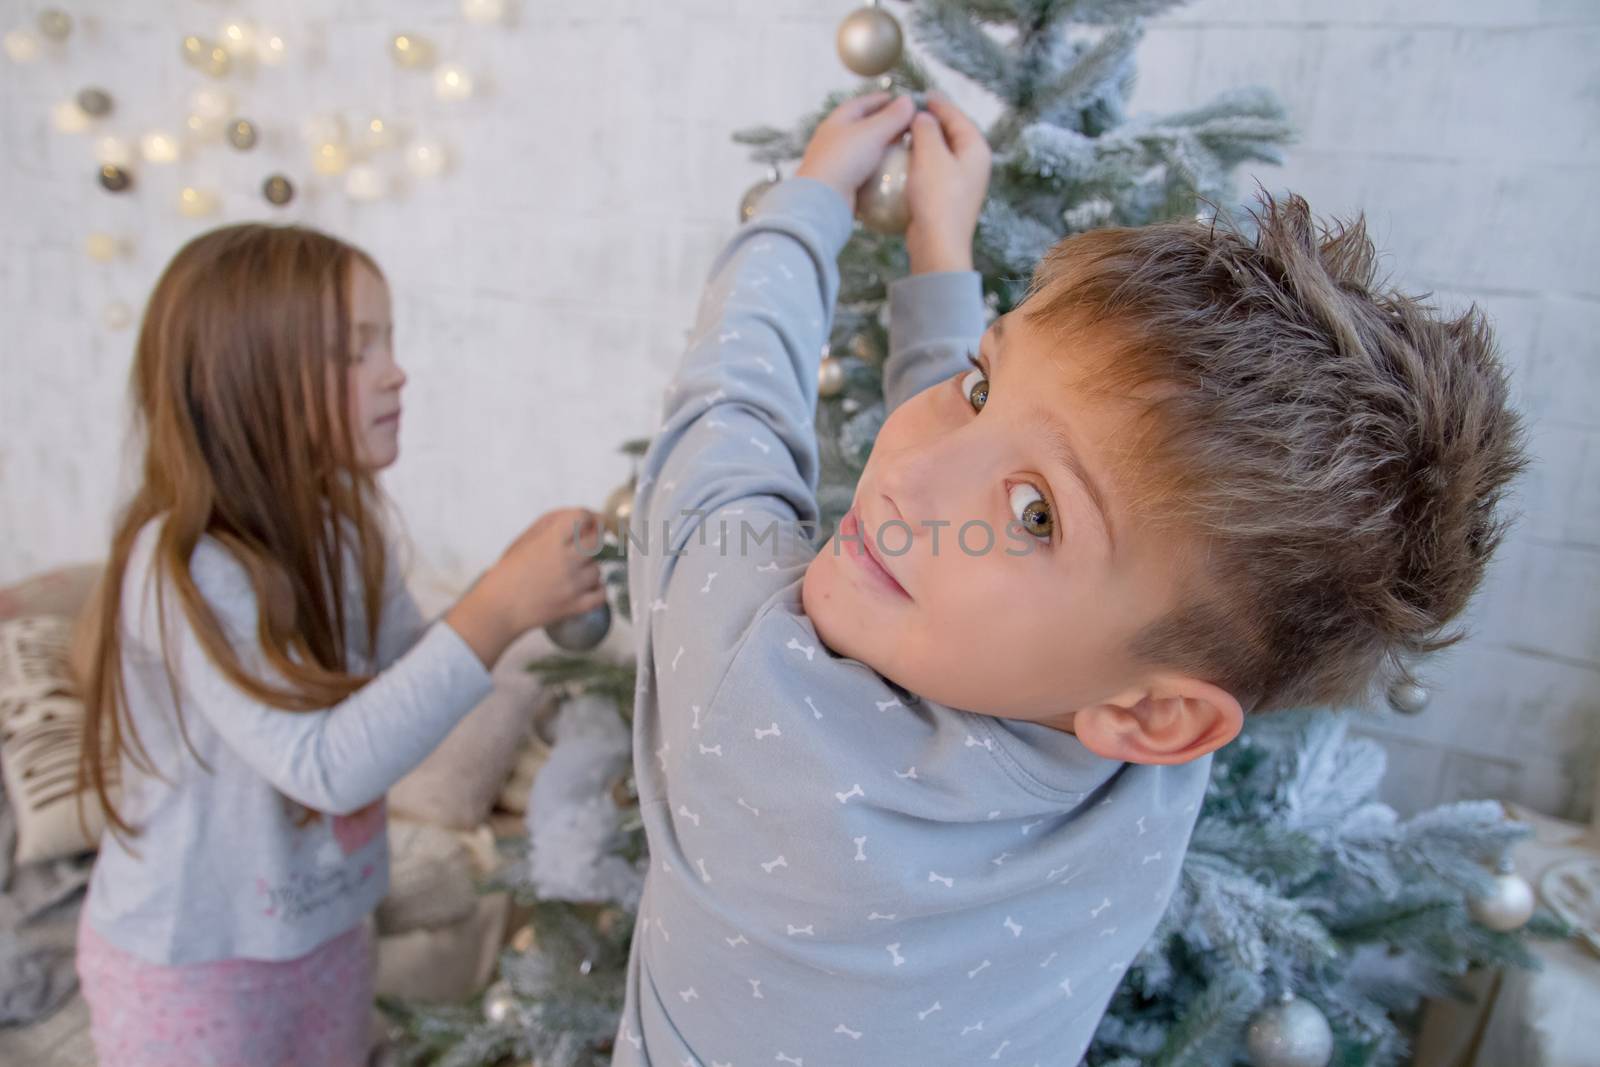 Boy and girl decorating Christmas tree by Angel_a